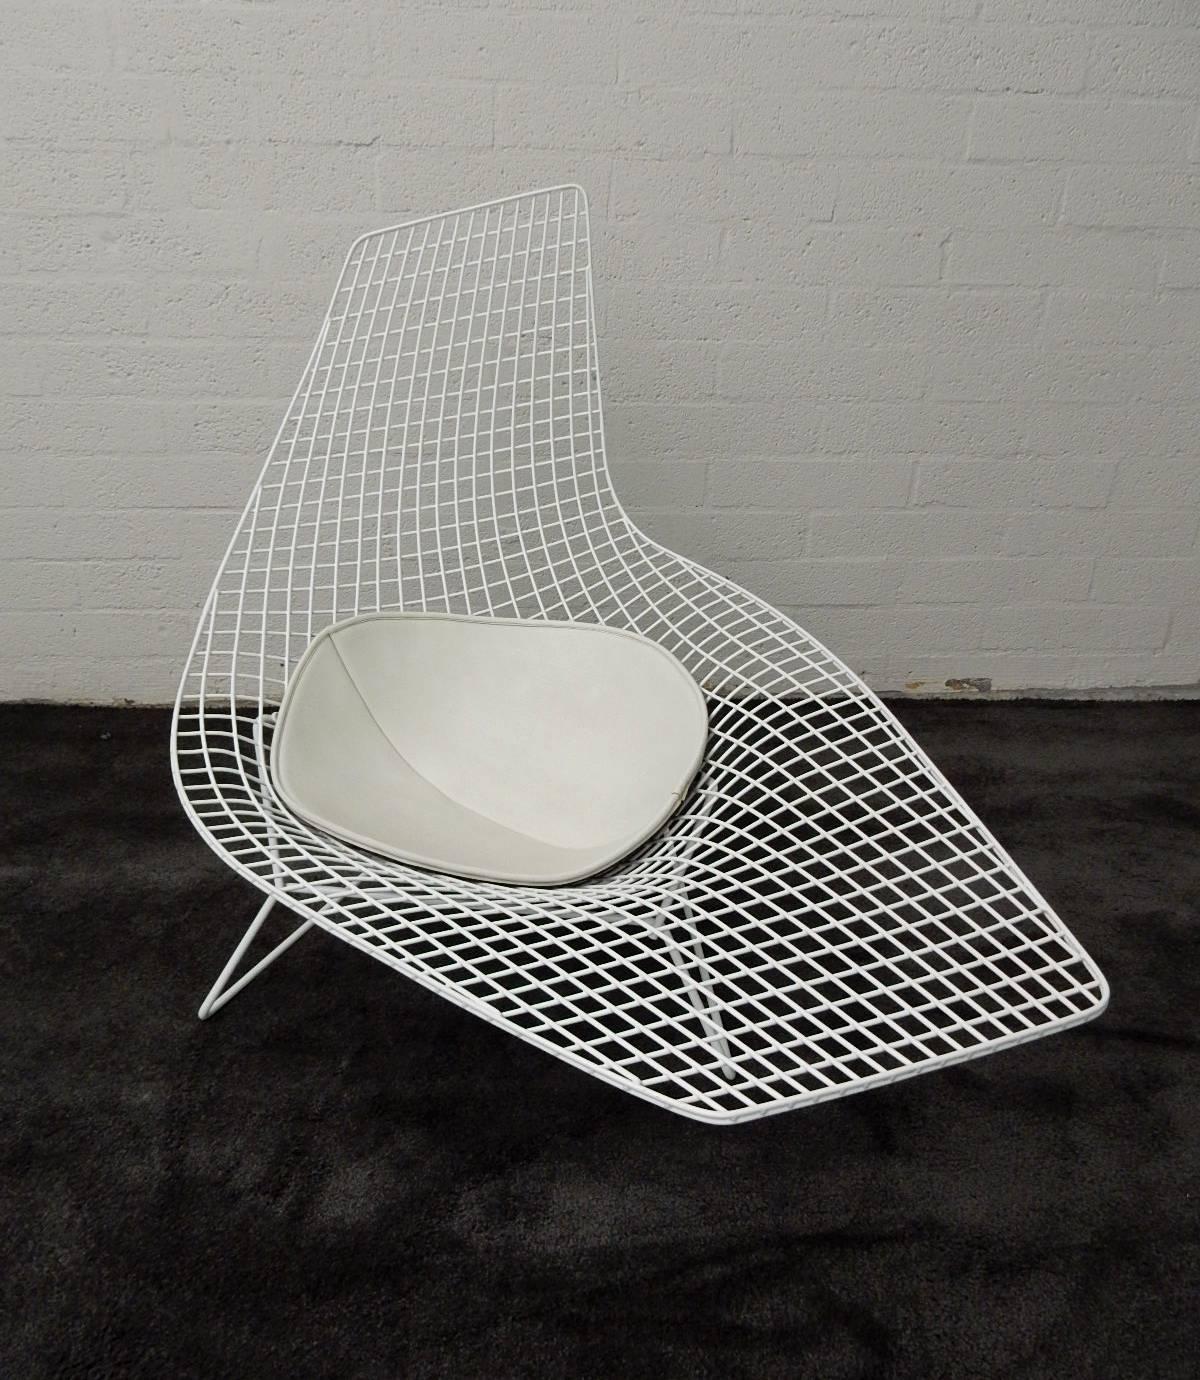 The Asymmetric lounge is the most sculptural of Harry Bertoia’s 1952 wire chair collection. The chair never made it beyond a prototype until 2005, when Knoll, with help from Bertoia’s family, put the design into full production.

This example was